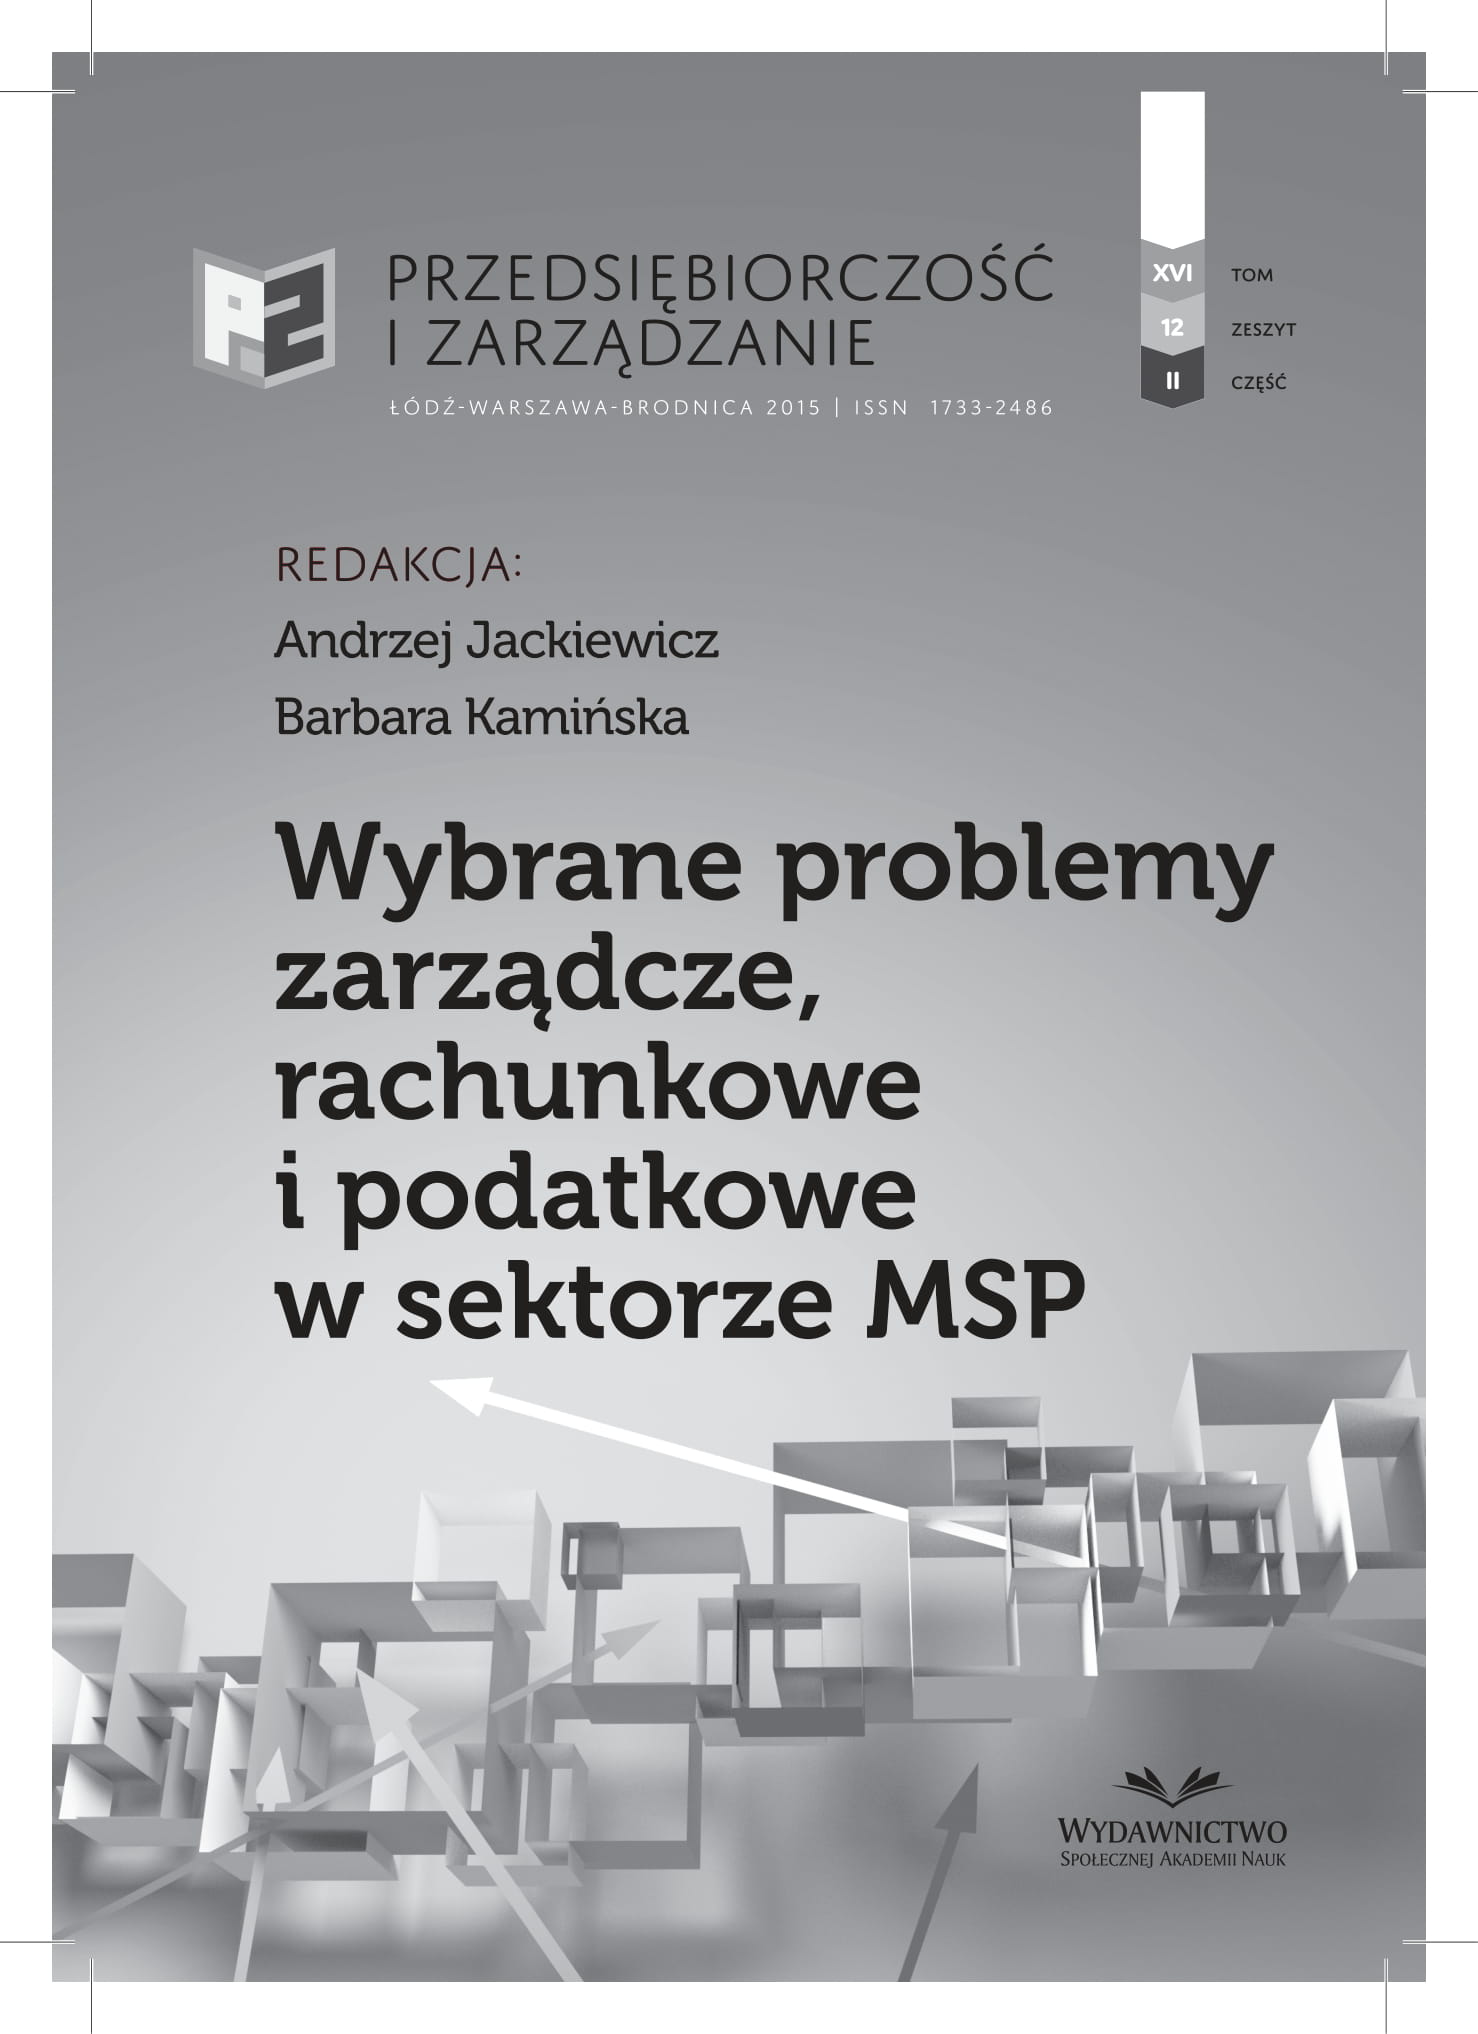 Selected Problems of Diffusion Knowledge Management in SMEs  on Example of Researches in Brodnica Region Cover Image